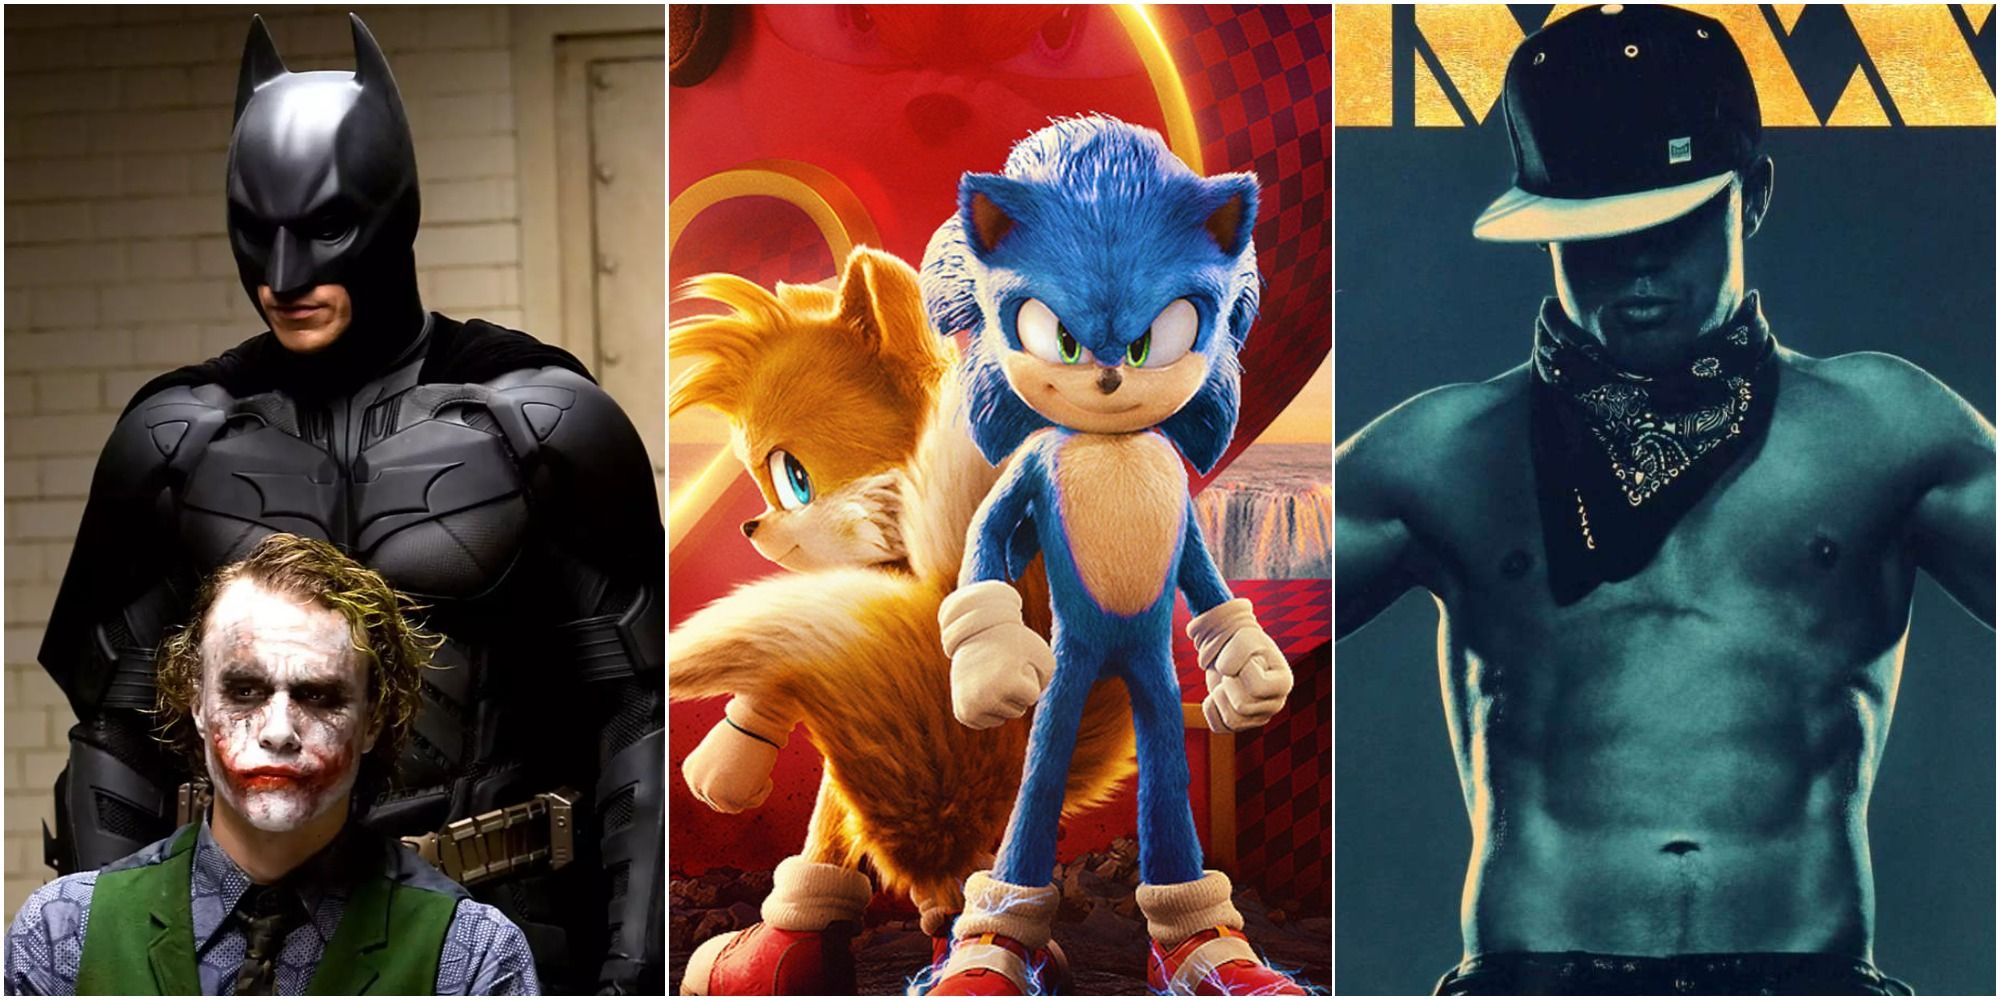 Sonic the Hedgehog 2' Explodes Out of the Box Office Blocks